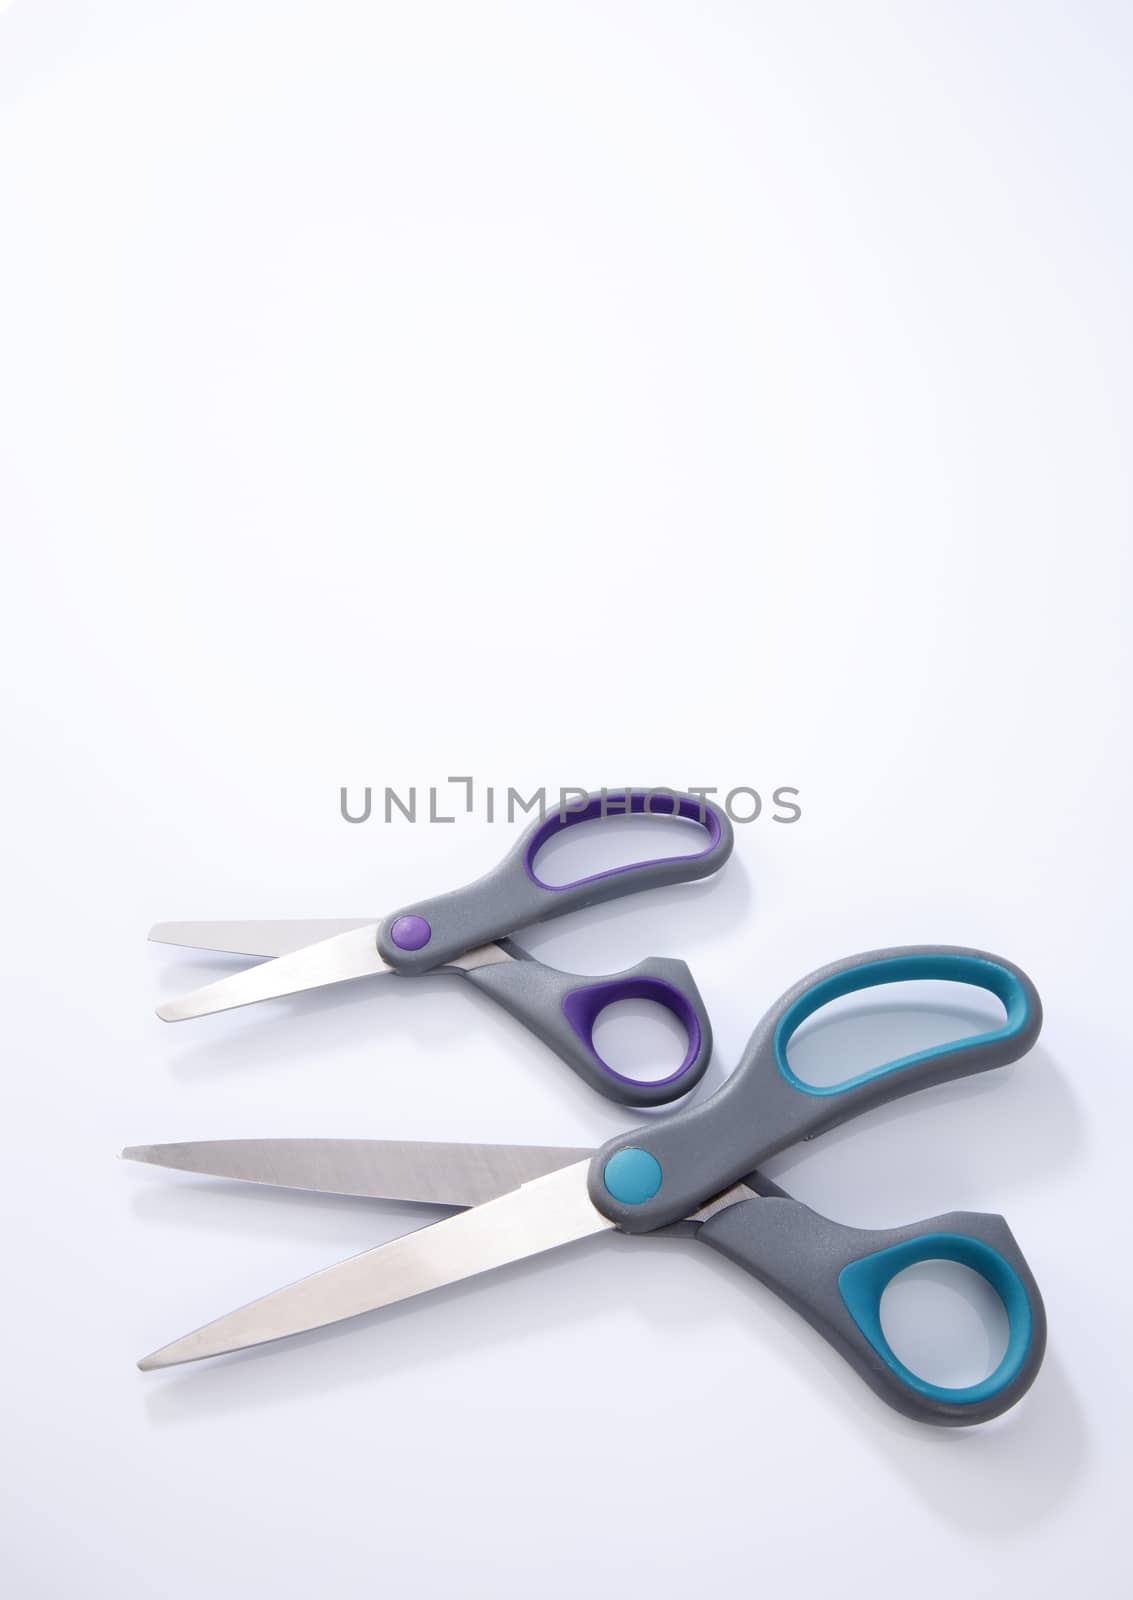 two pair of scissors which one big and small on the white background